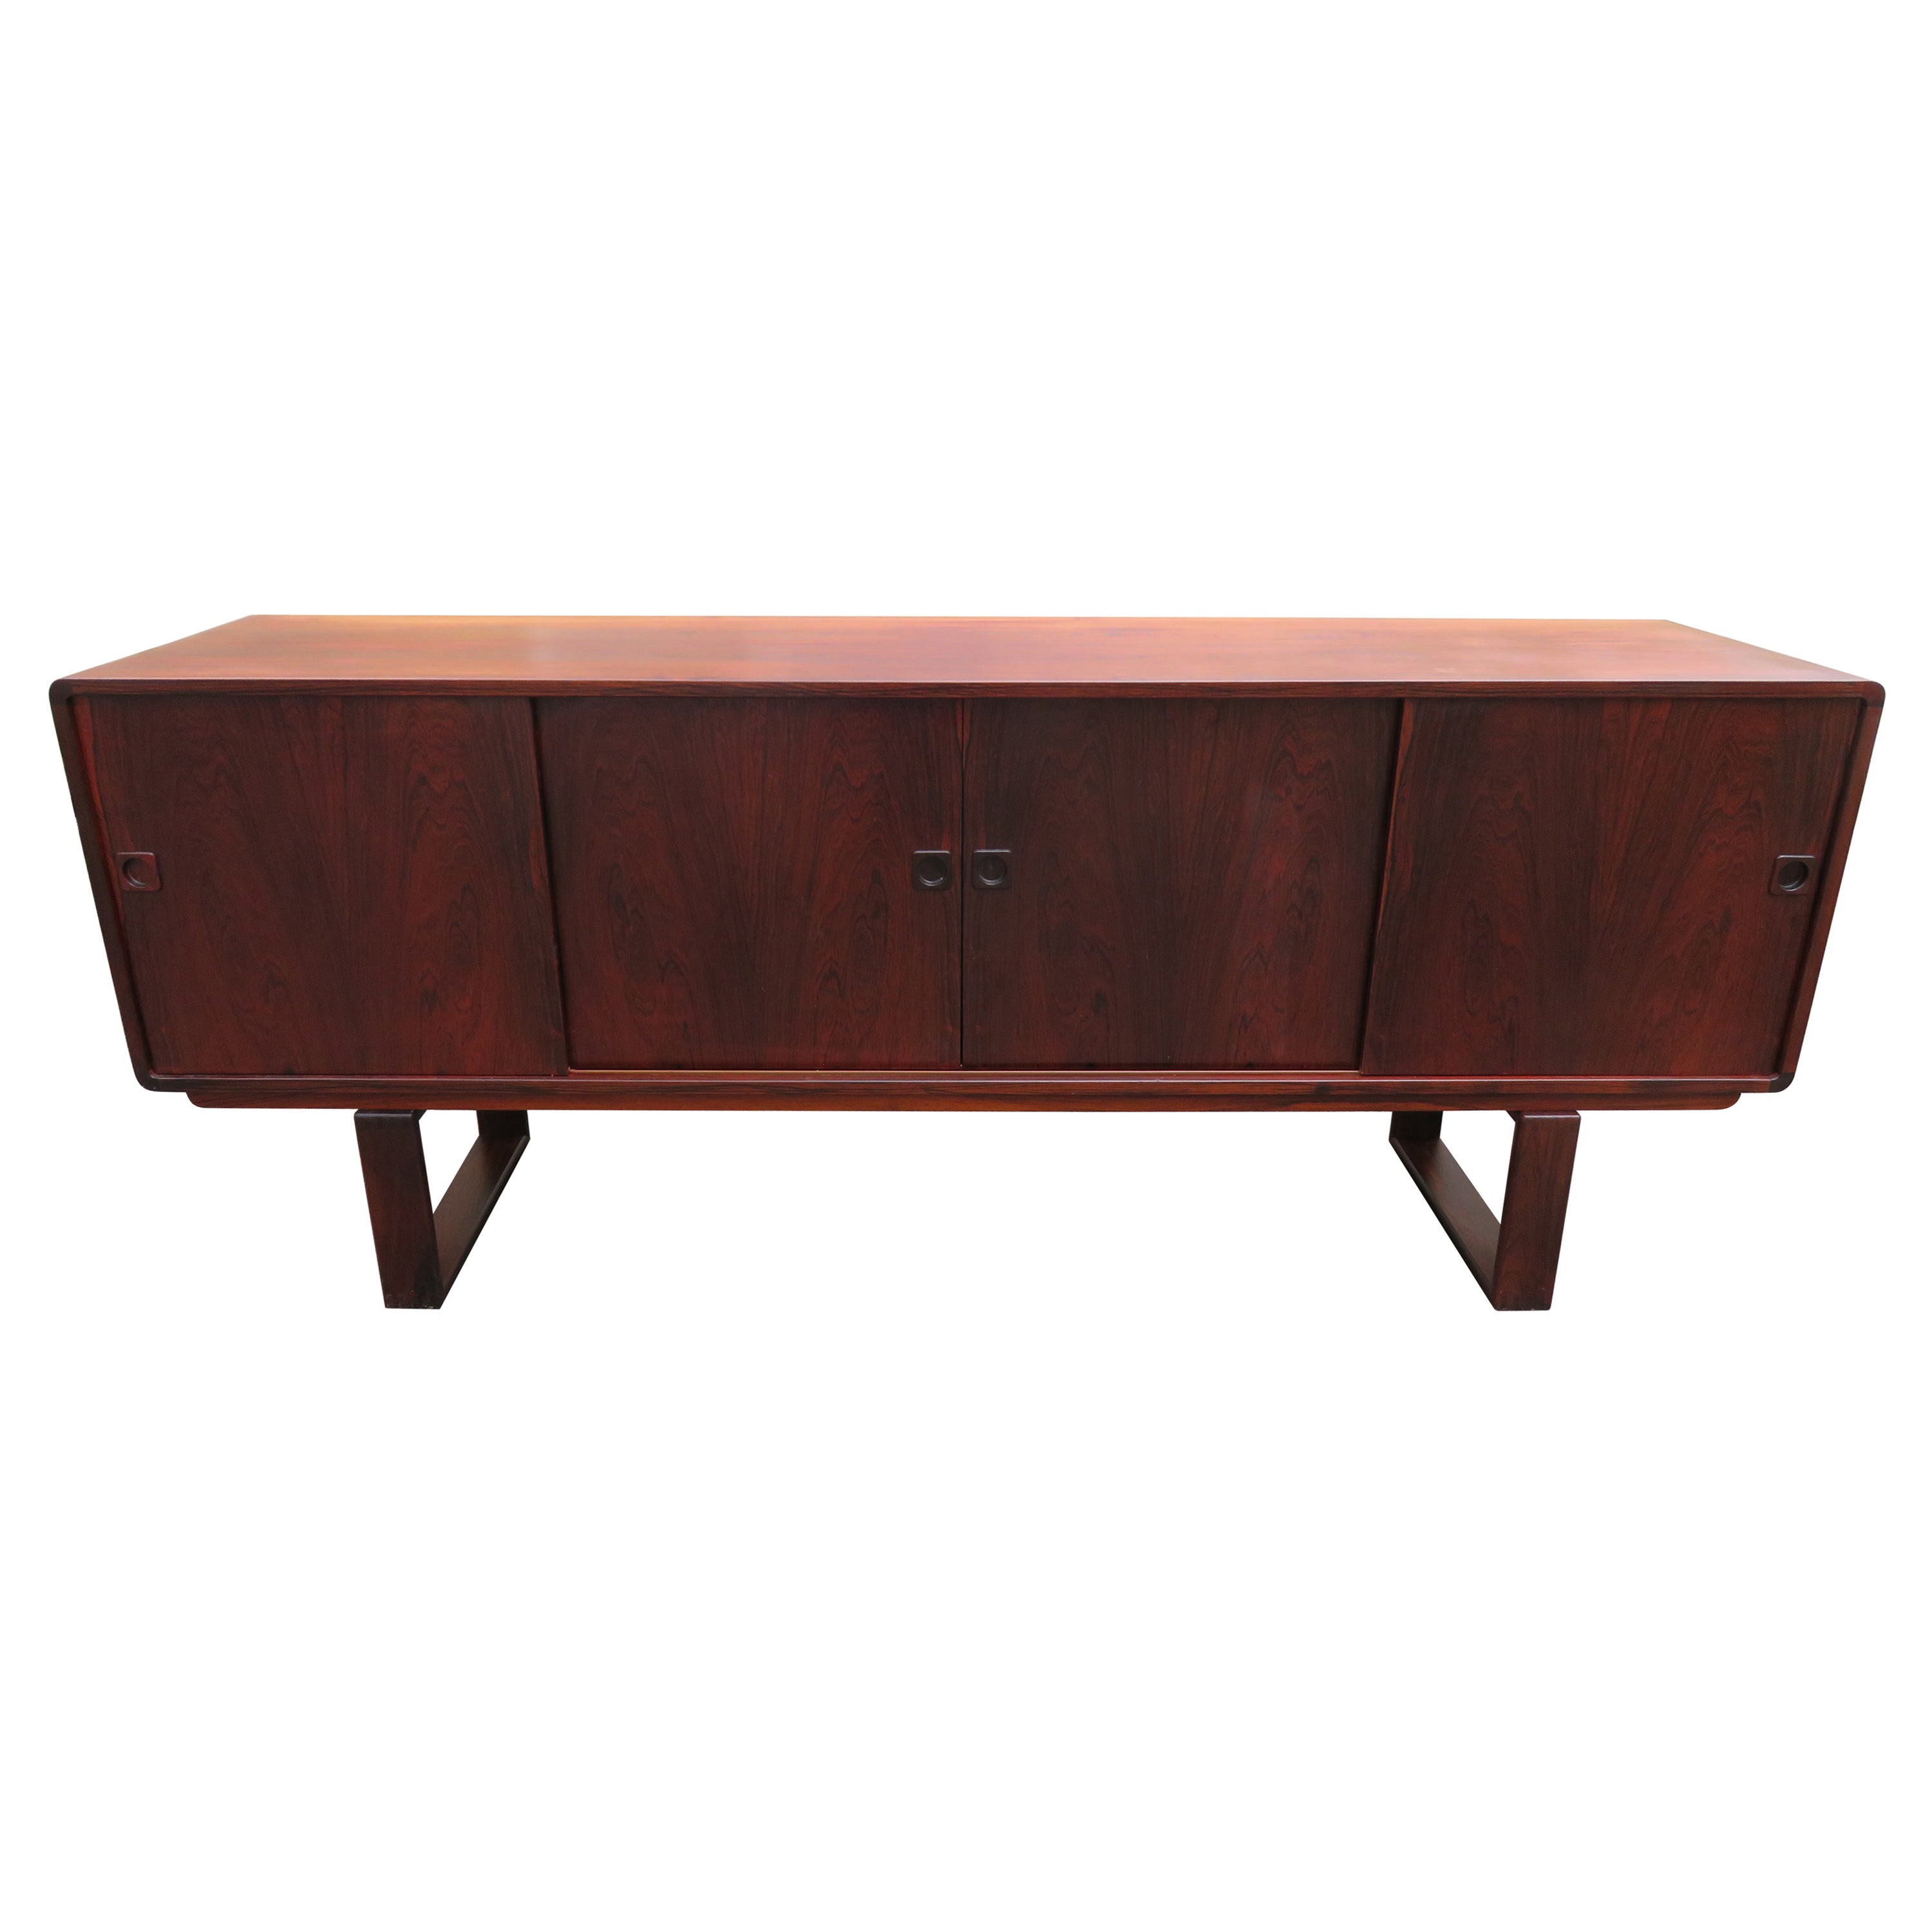 Handsome Dyrlund Danish Rosewood Credenza / Sideboard with Sled Legs For Sale